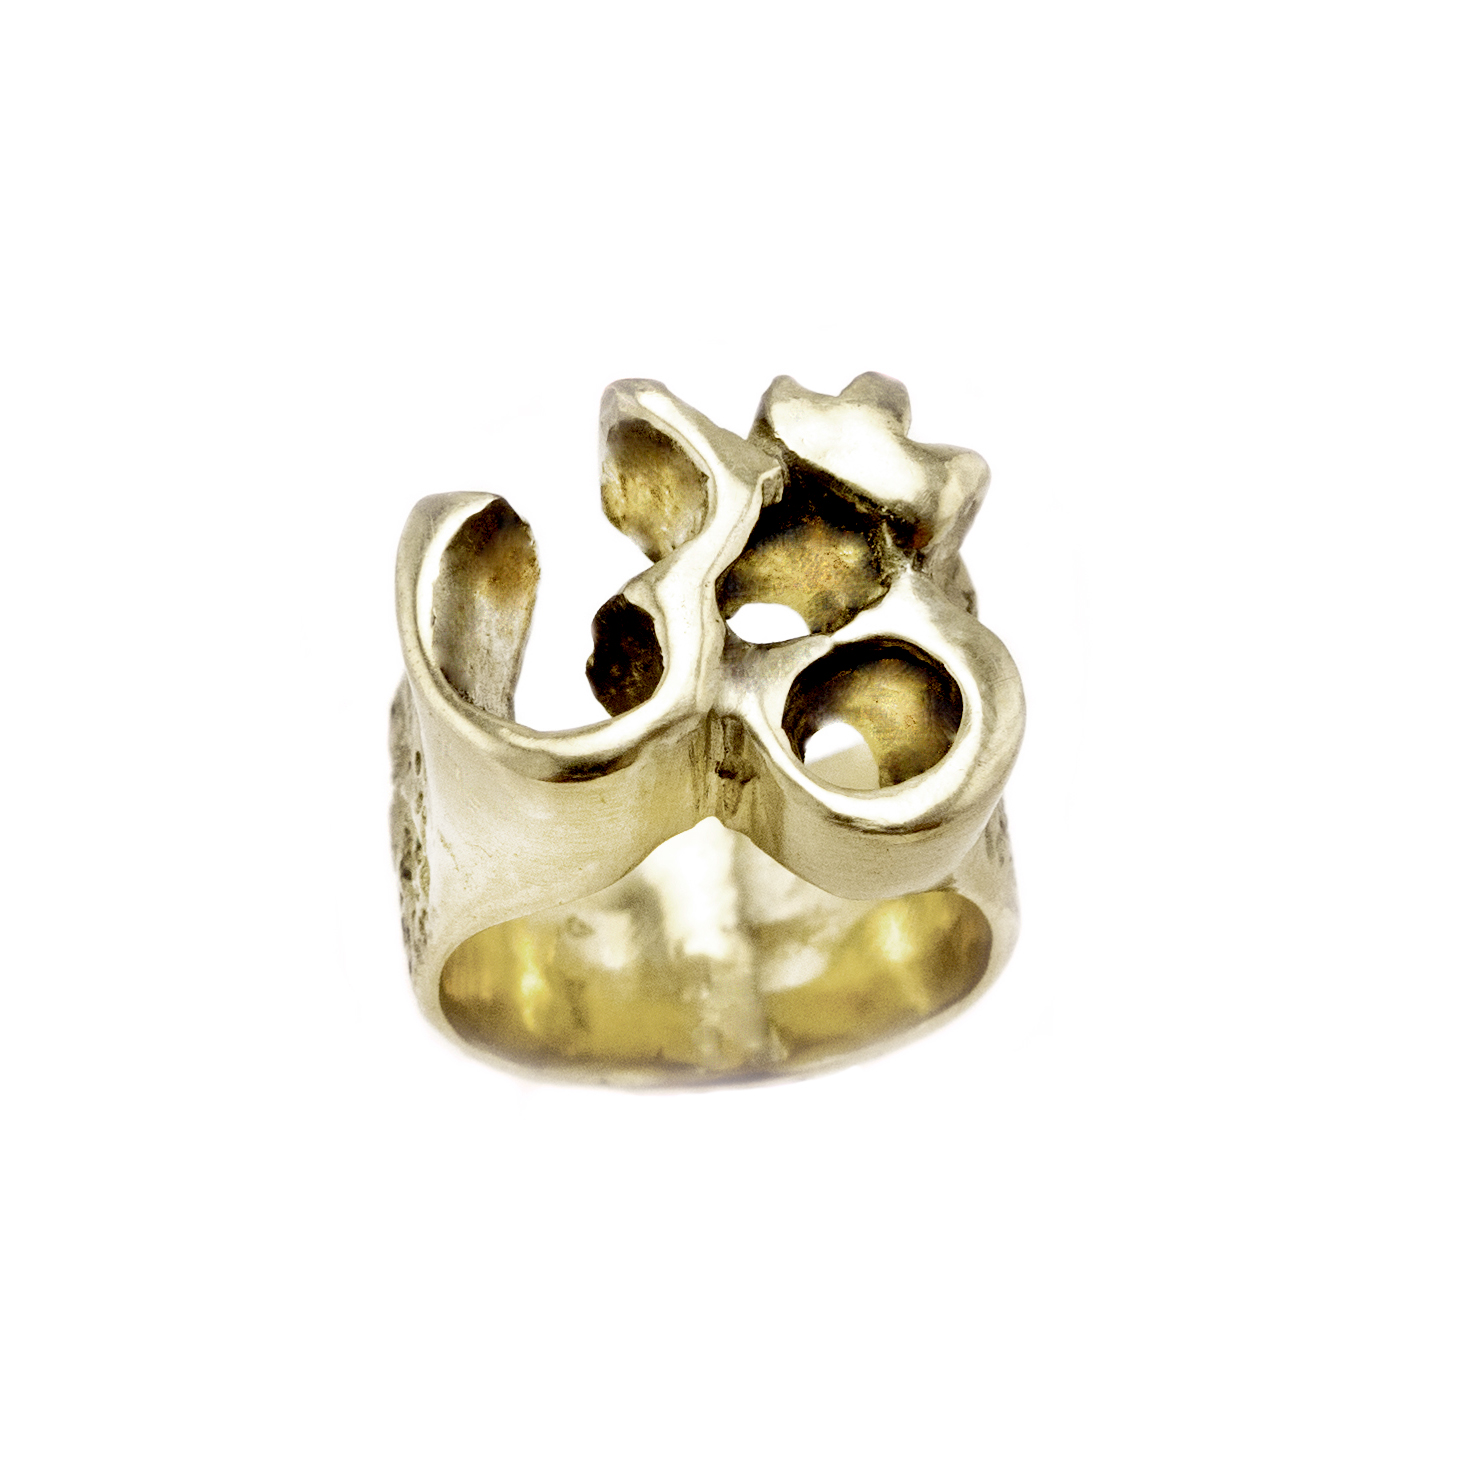 Bold Om Ring - € 200
Free Shipping

We currently have the ring pictured in stock in a ITA size 16-US size 8-UK size O1/2-Diameter cm.1,78
But this ring can be adjusted or ordered to size.

DETAILS

Bronze
High Polished Finish
Nickel-free
Handmade
Engraved with Patrizia Casamirra Jewels Logo
